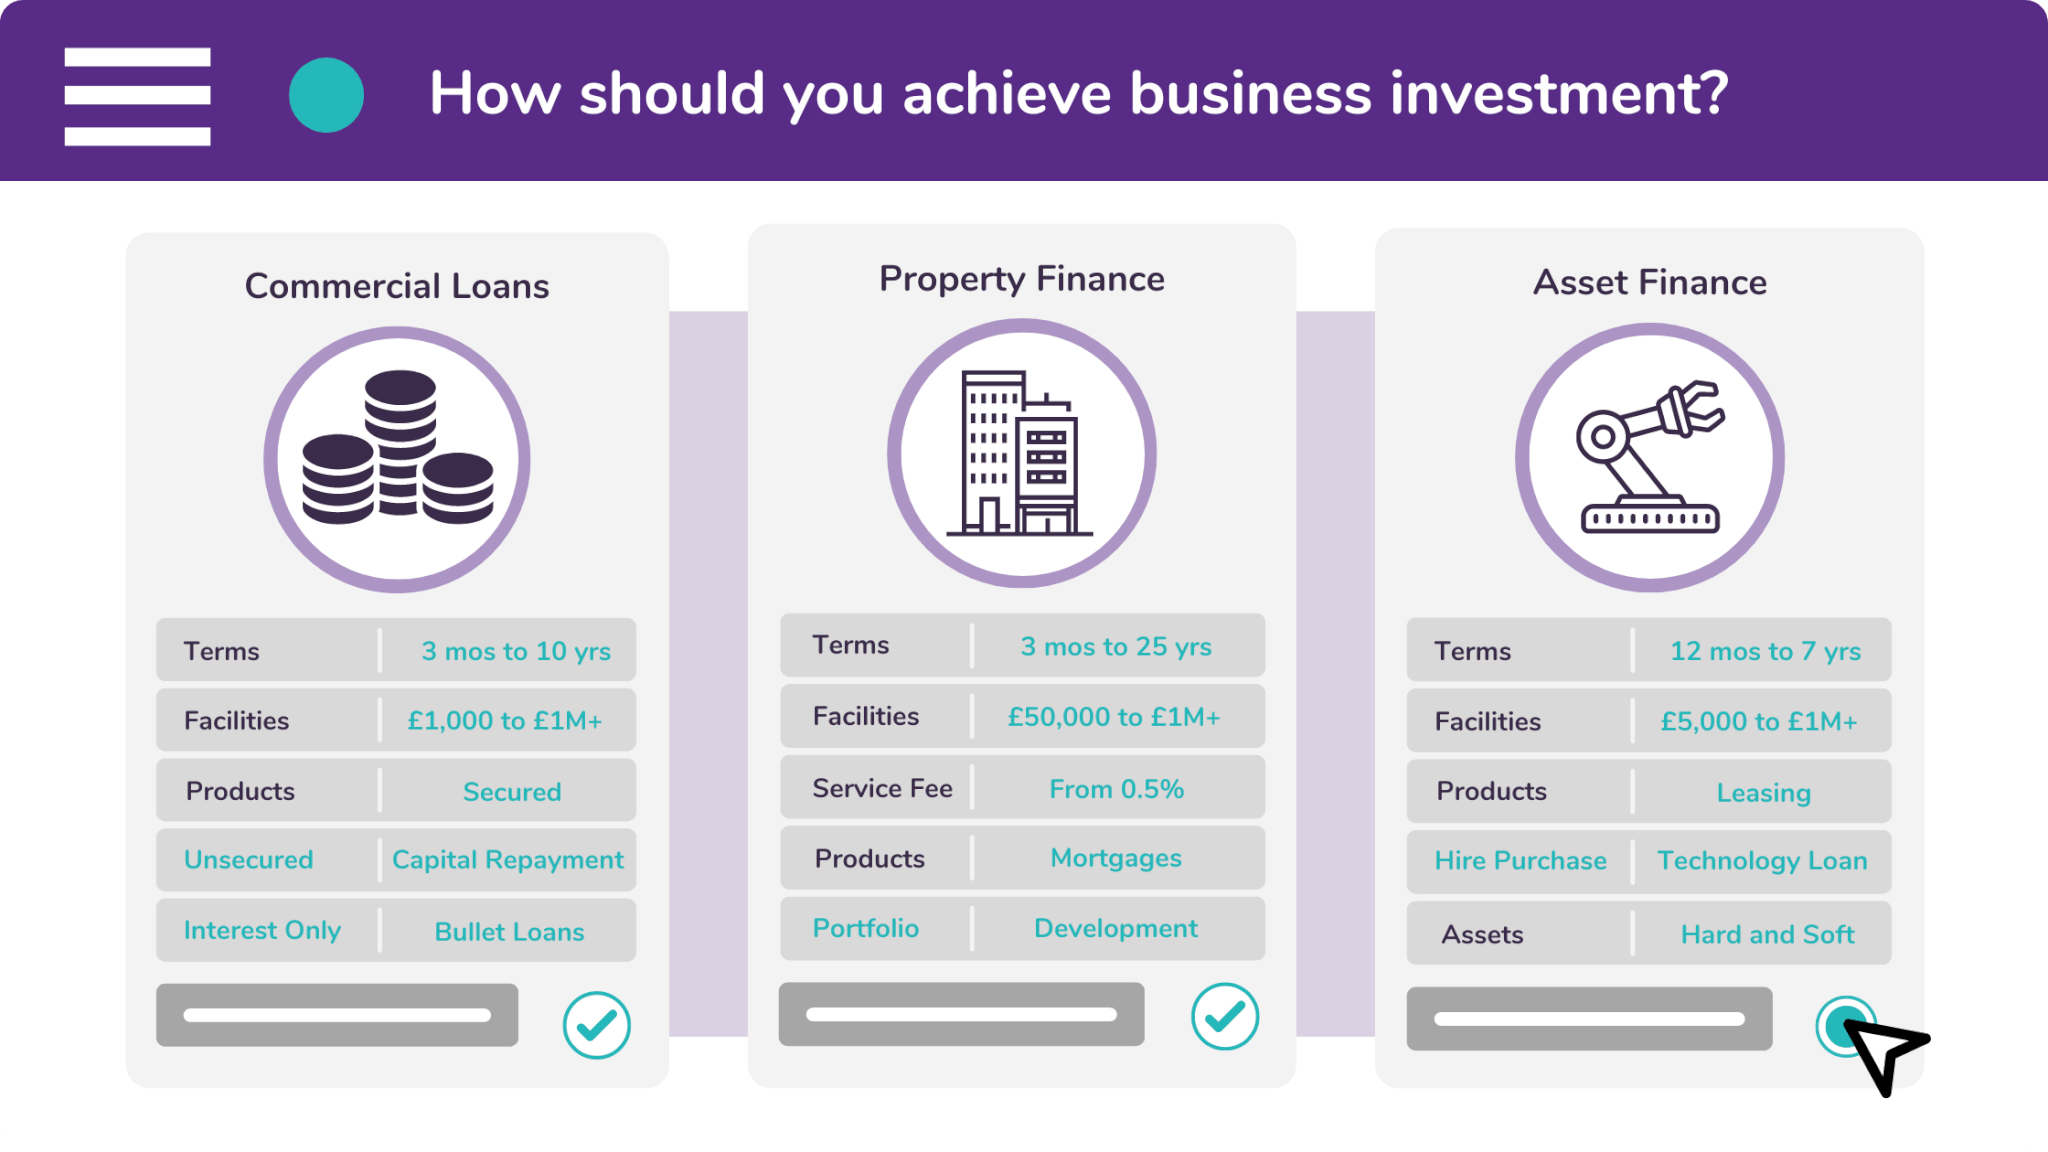 You can achieve business investment through a commercial loan, property finance, and asset finance.